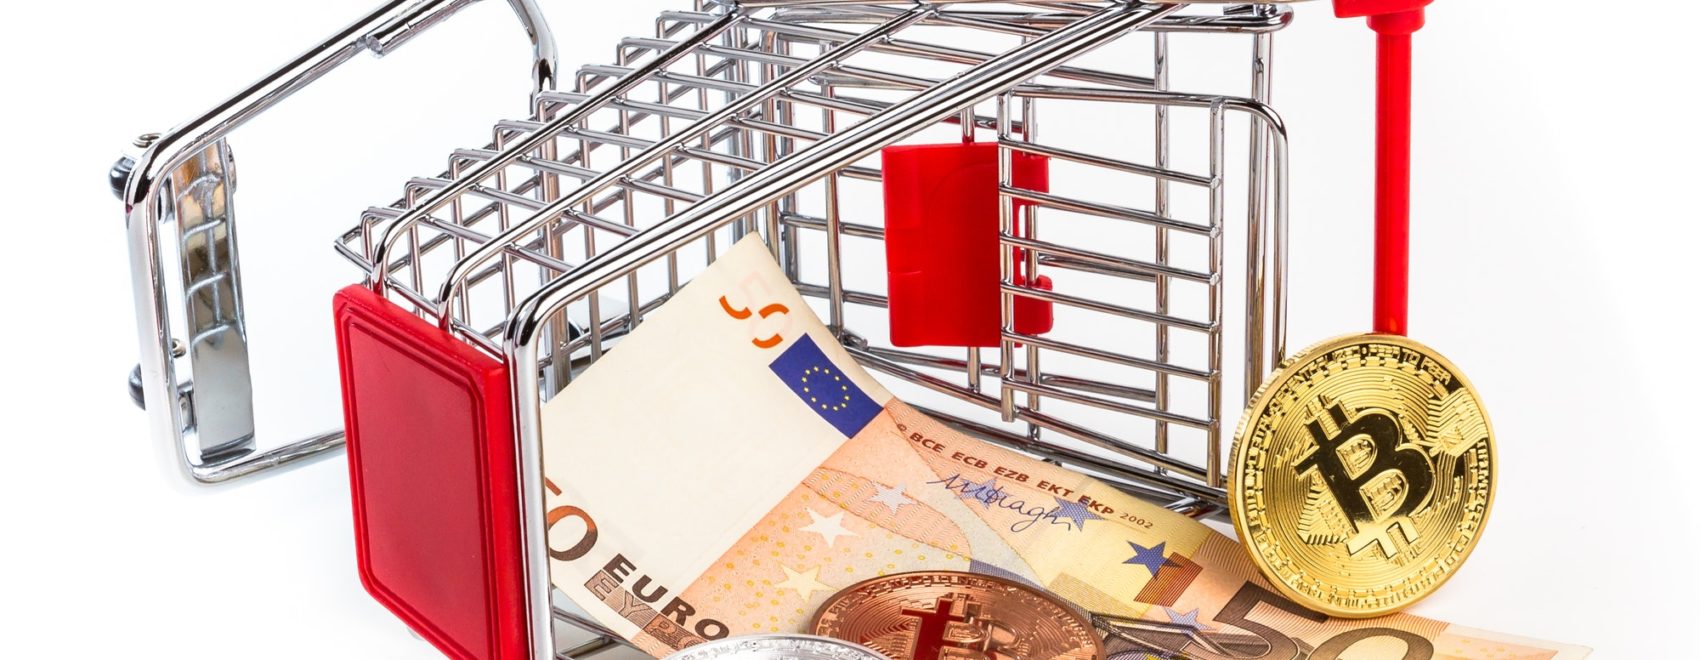 Currency Collapse and fifty euro banknote in overturned shopping cart